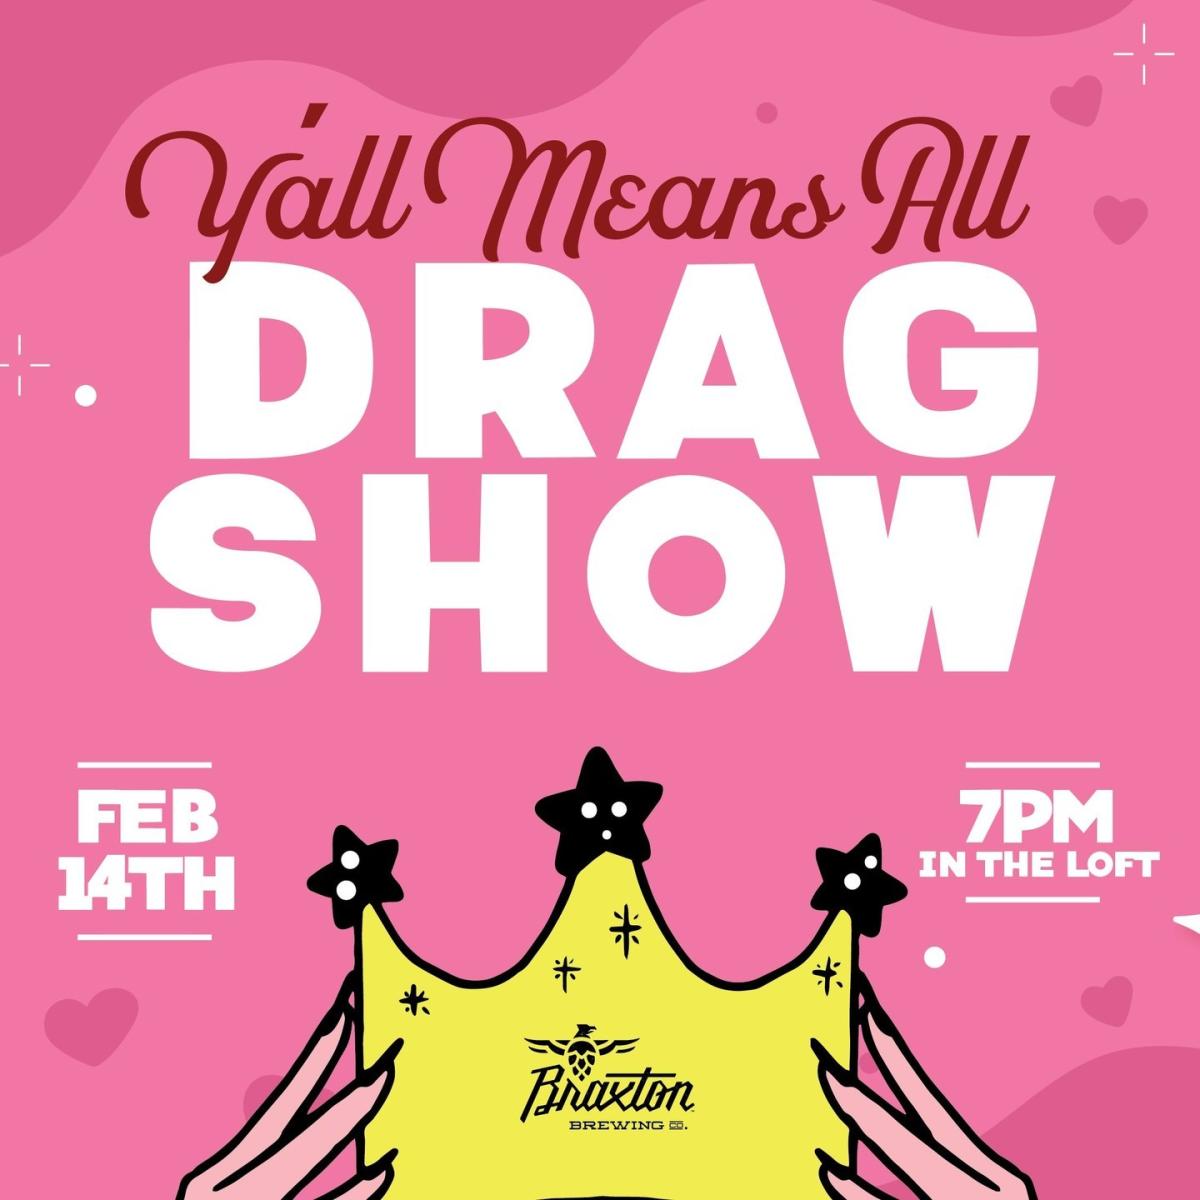 Image is a poster of the upcoming Braxton Brewing "Y'all Means All Drag Show". It says "Y'all Means All Drag Show, Feb 14th, 7pm in the Loft".